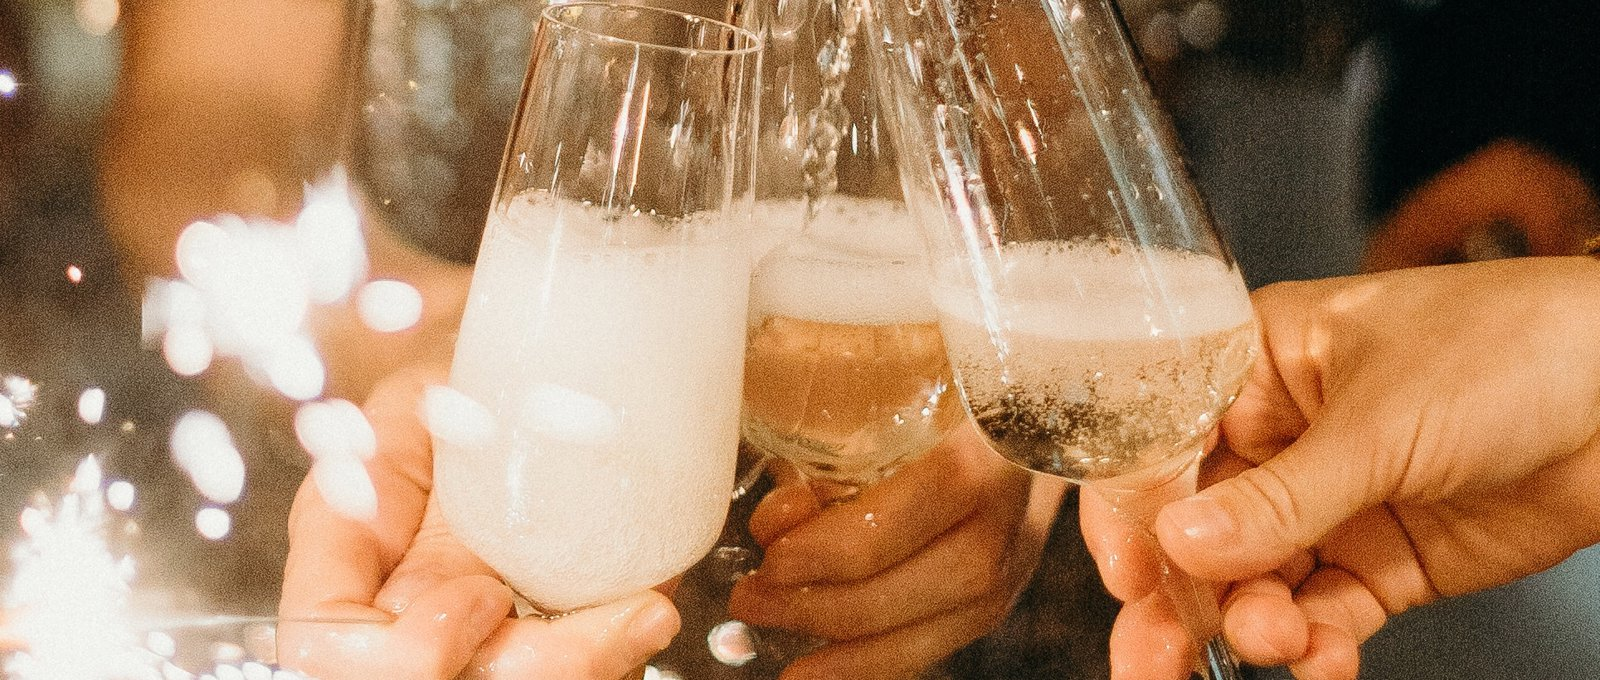 Champagne glasses being filled at a celebration